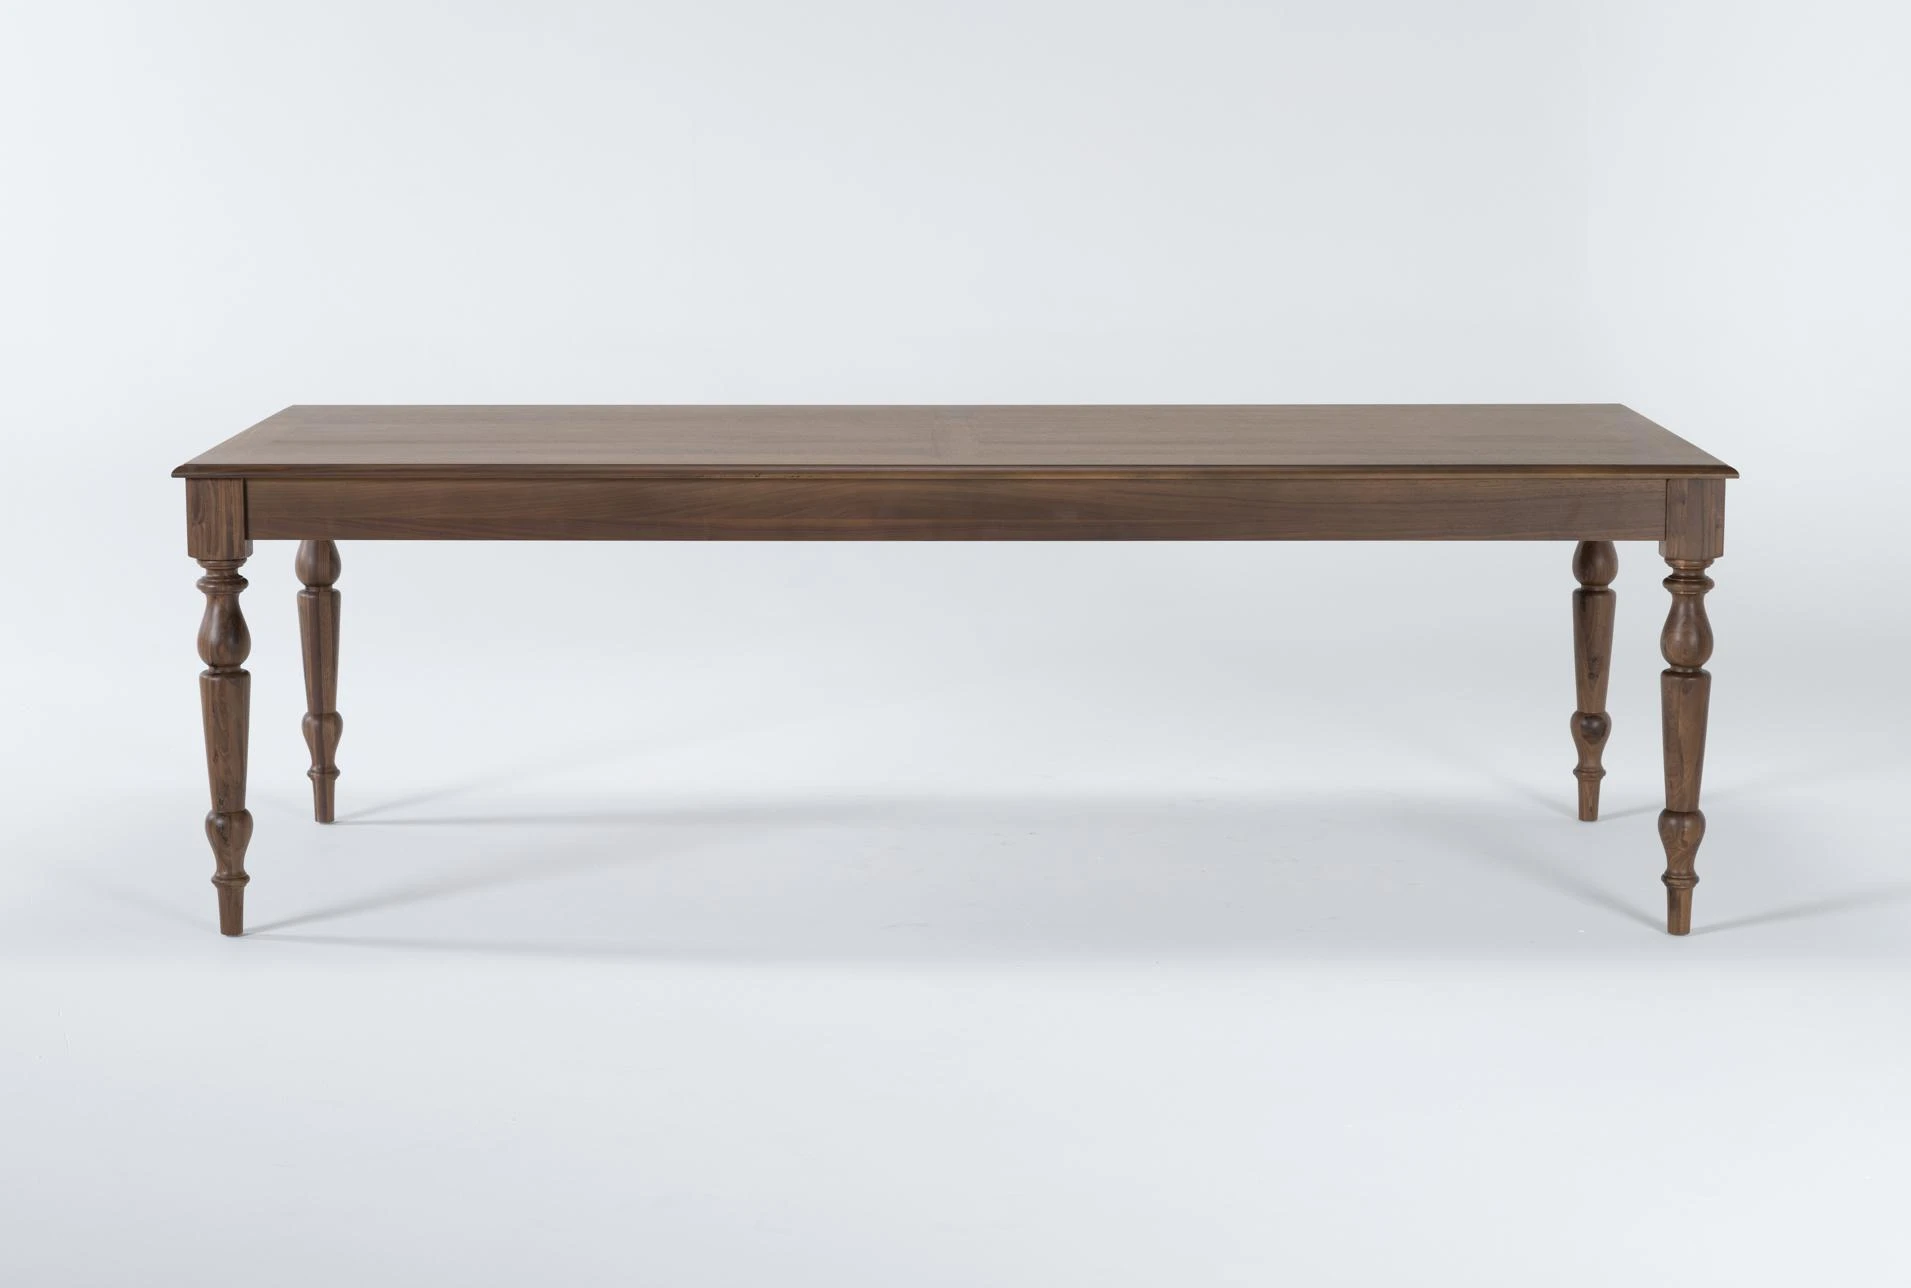 Shop Magnolia Home Webster Walnut 96 Inch Dining Table By Joanna Gaines from Living Spaces on Openhaus